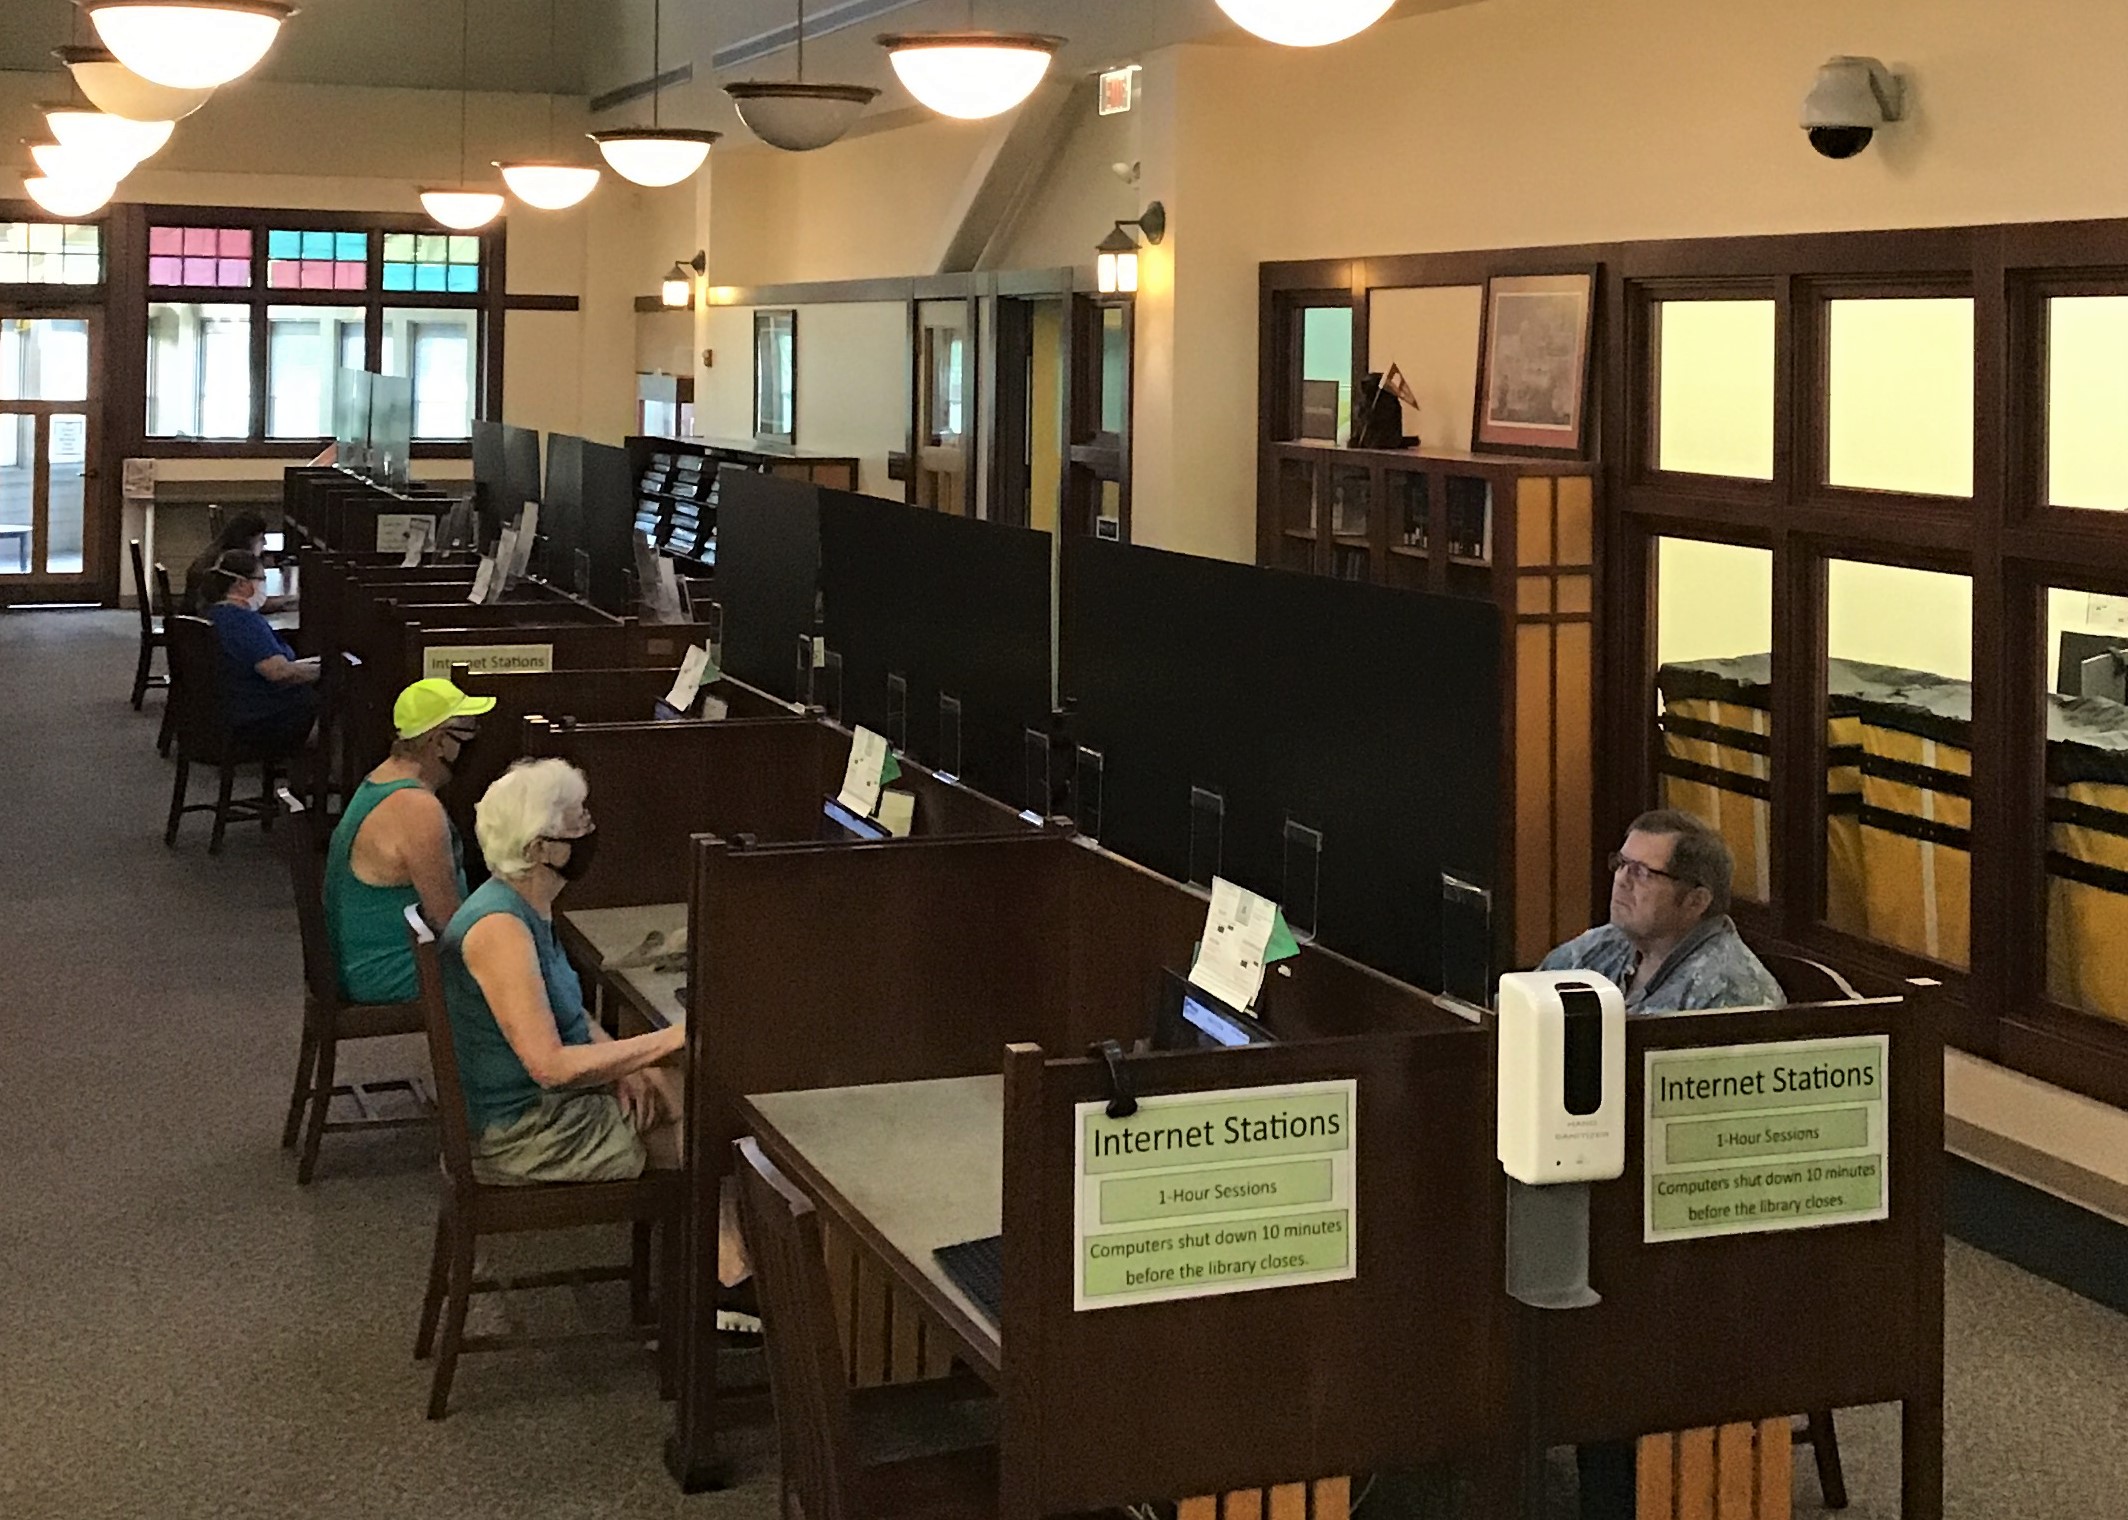 people sit at computers in the library while sunlight streams in from windows behind